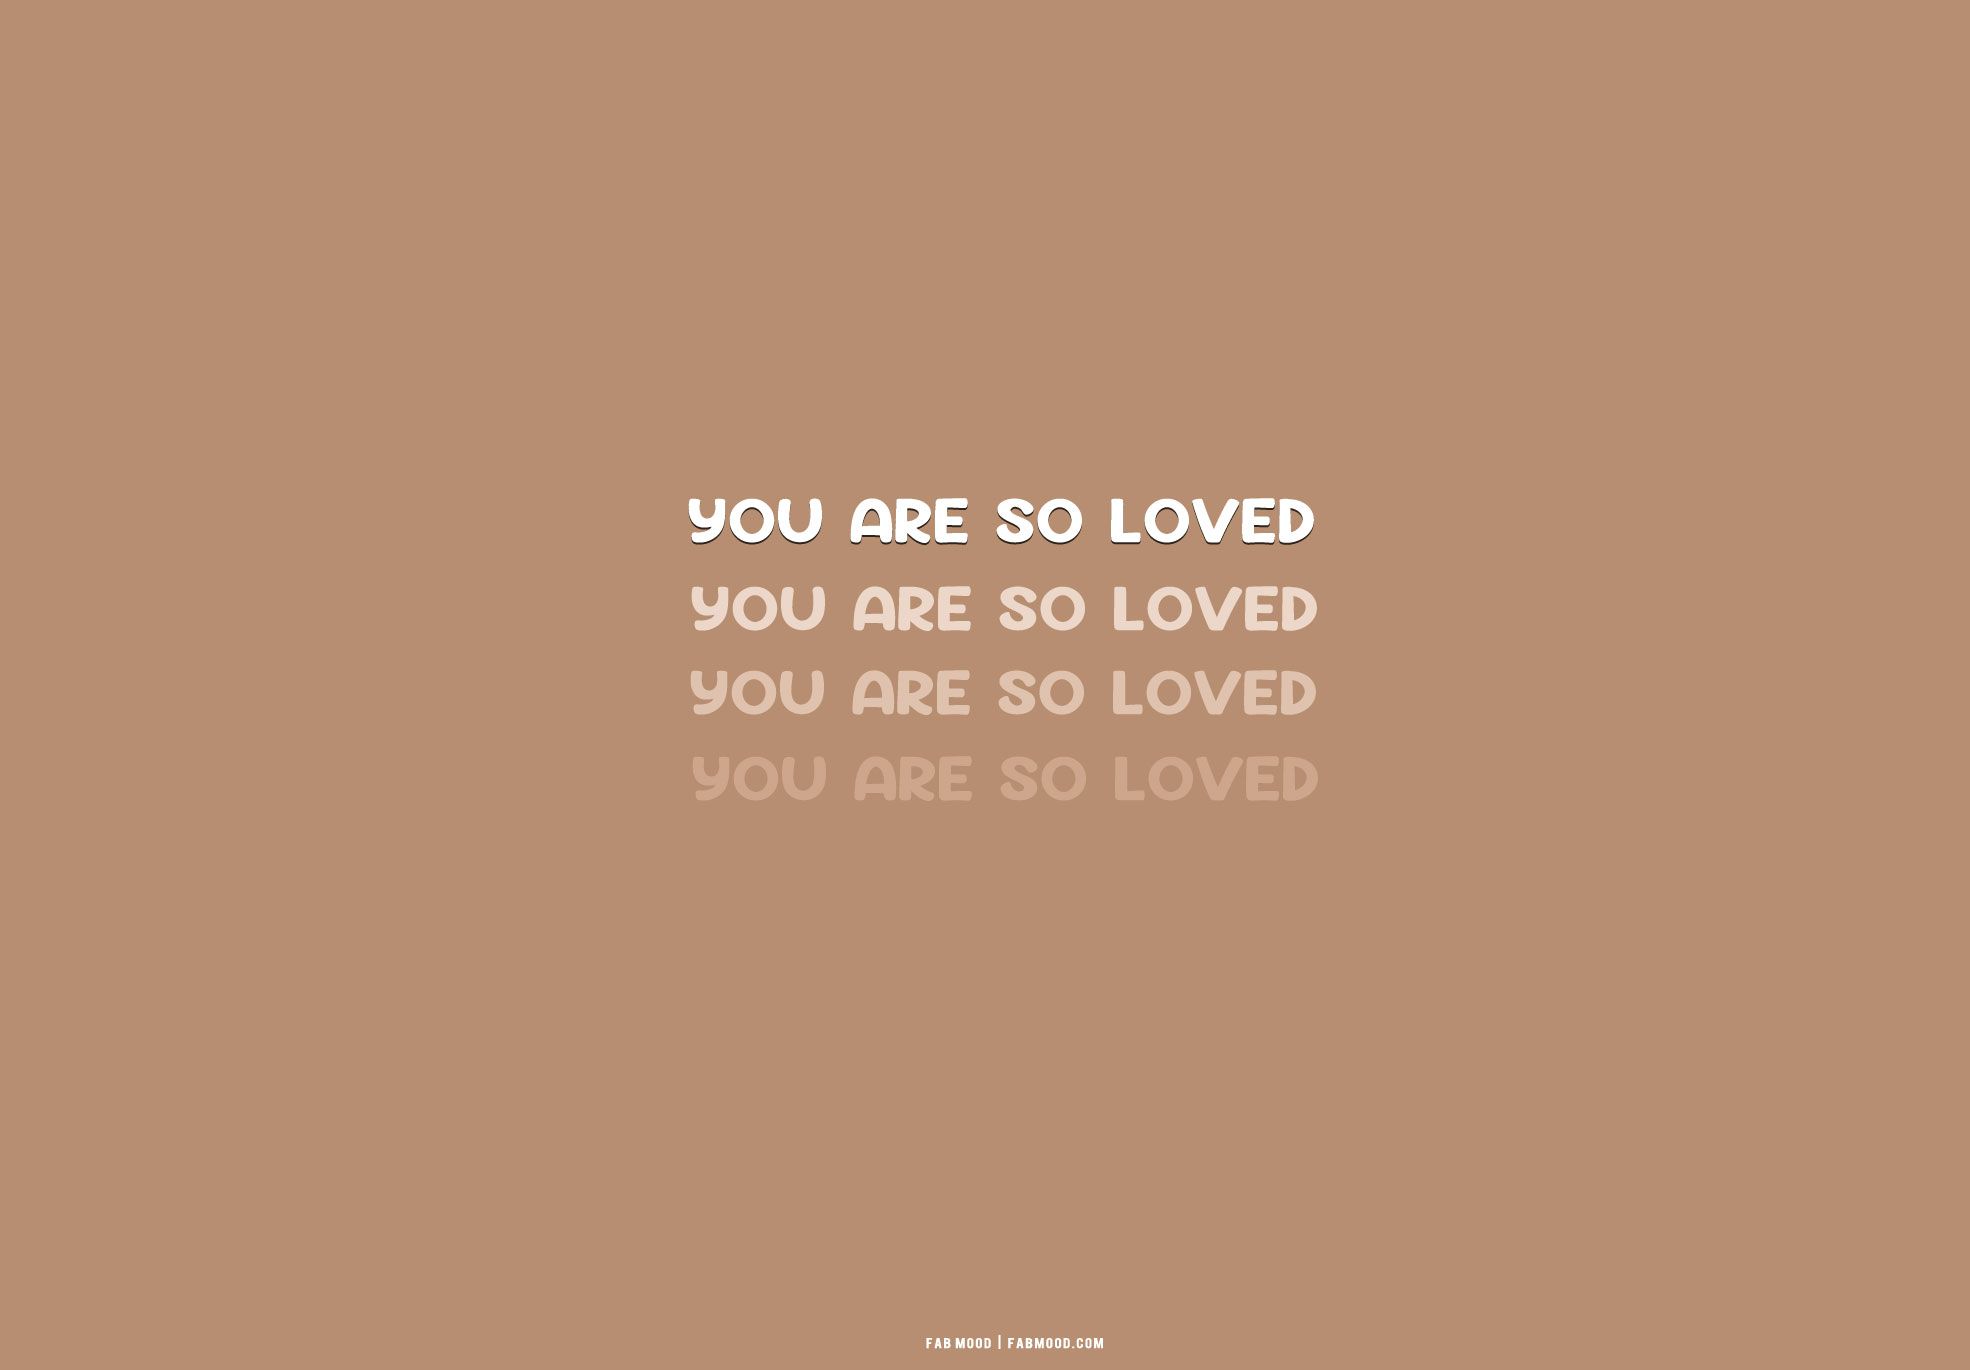 Brown Aesthetic Wallpaper for Laptop : You are so Loved Brown Aesthetic